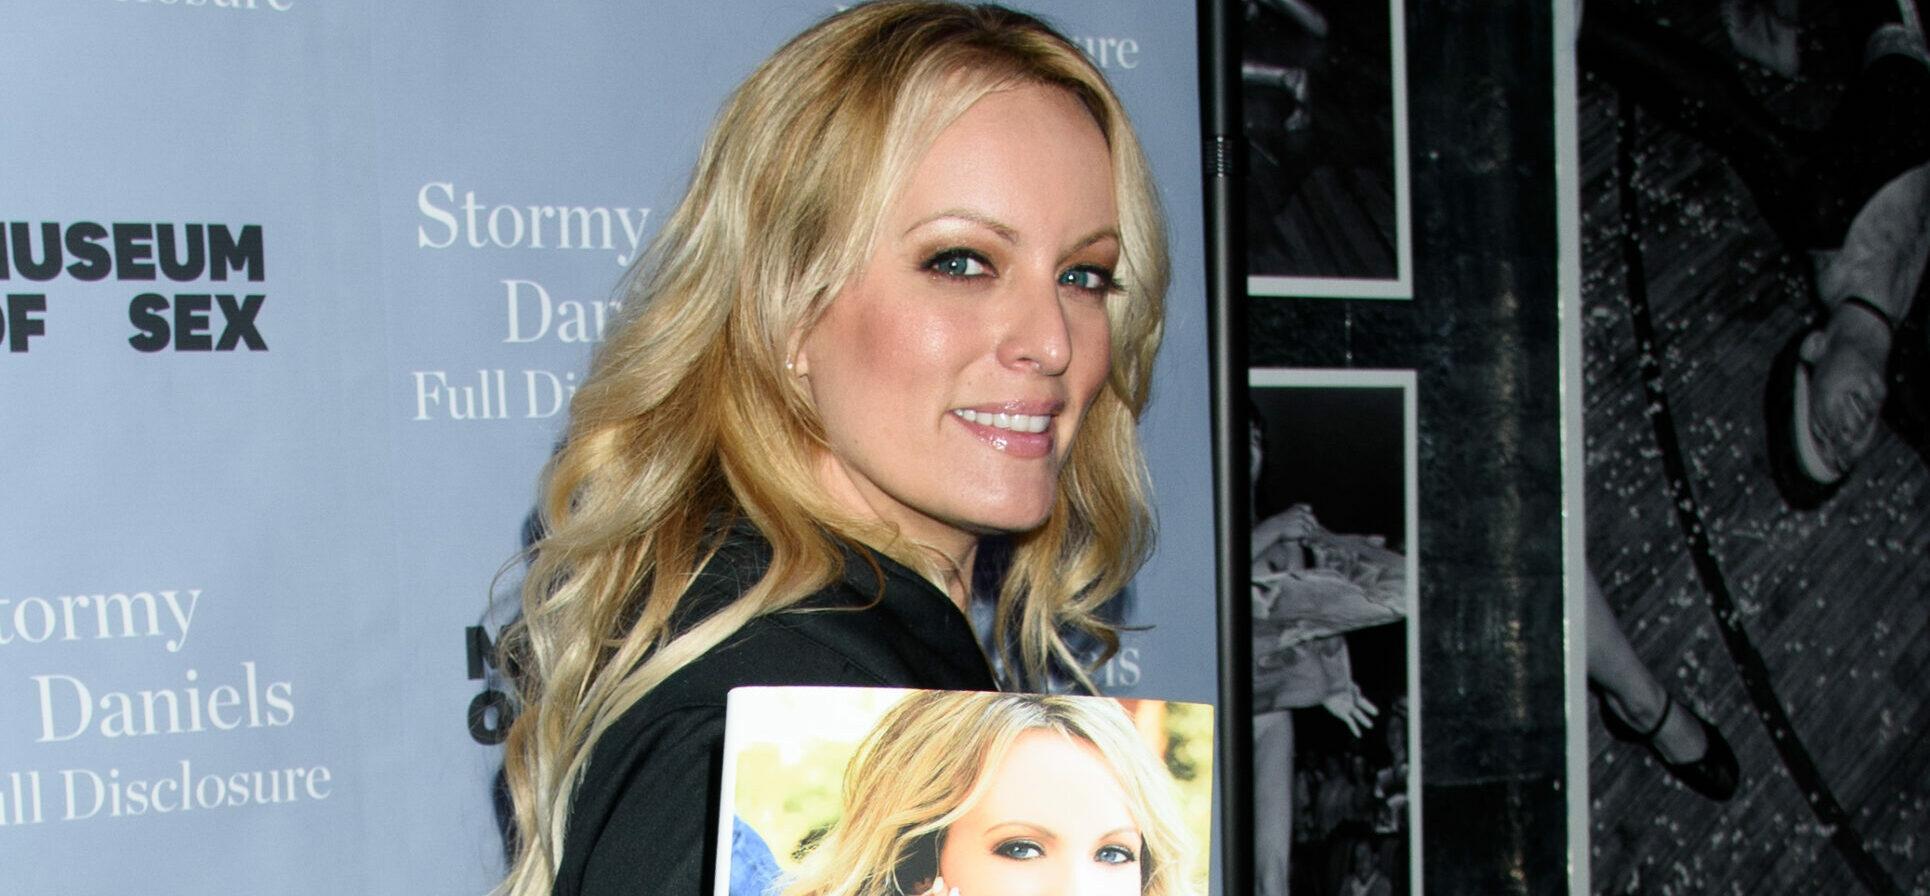 Pornstar Stormy Daniels Files To Legally Change Name Following Trump Scandal